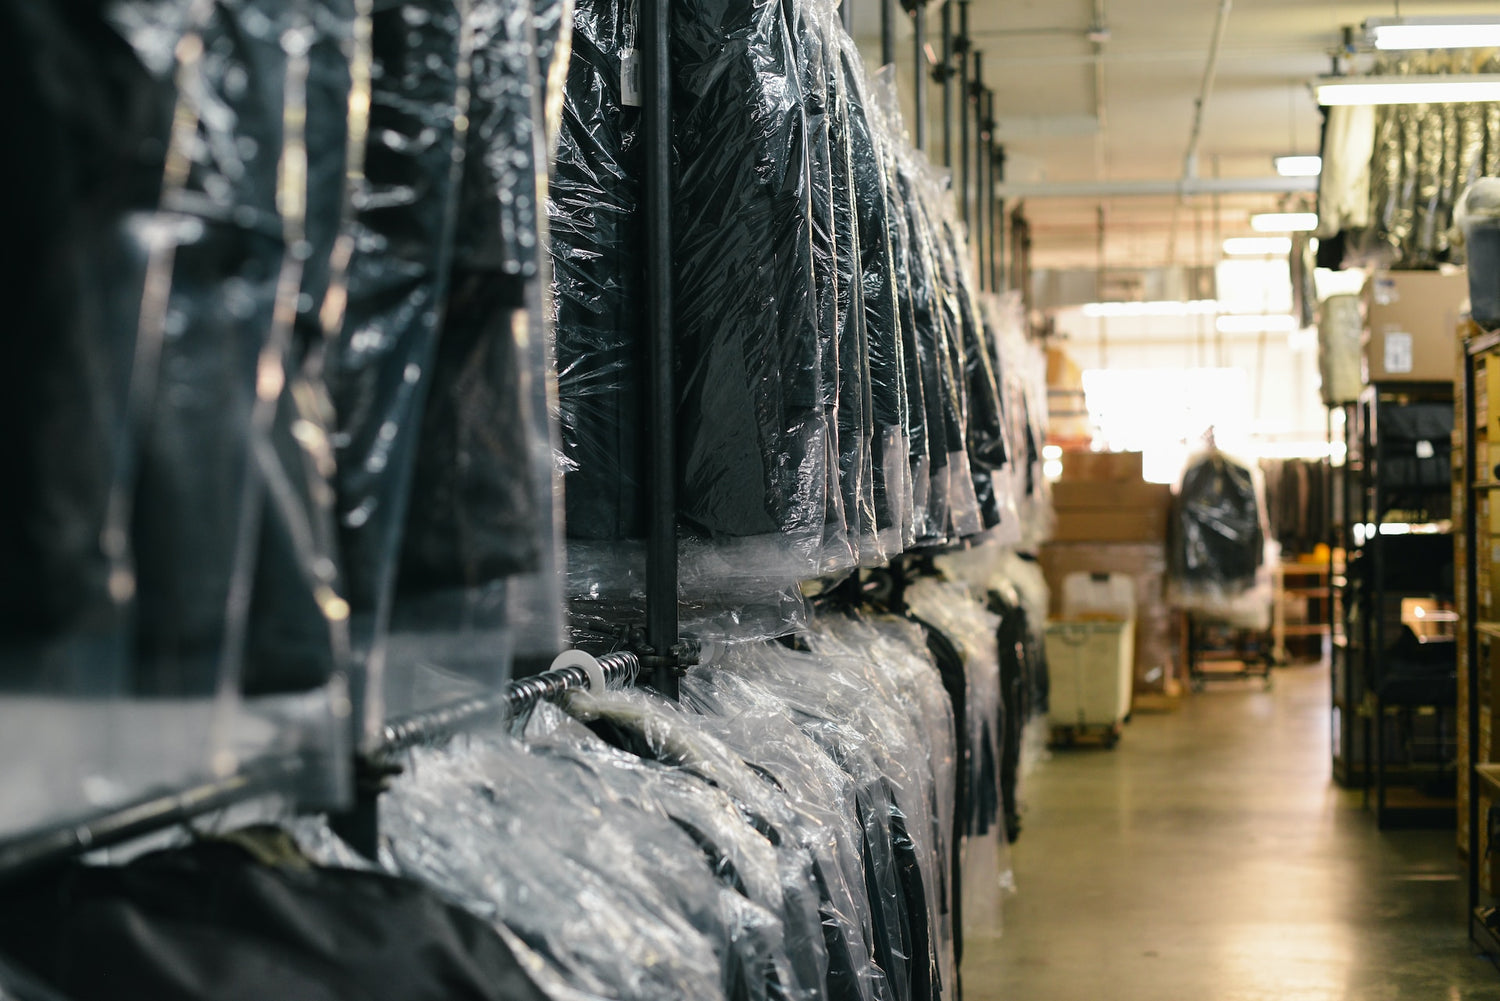 Ruined clothes? Dry cleaning customers have rights